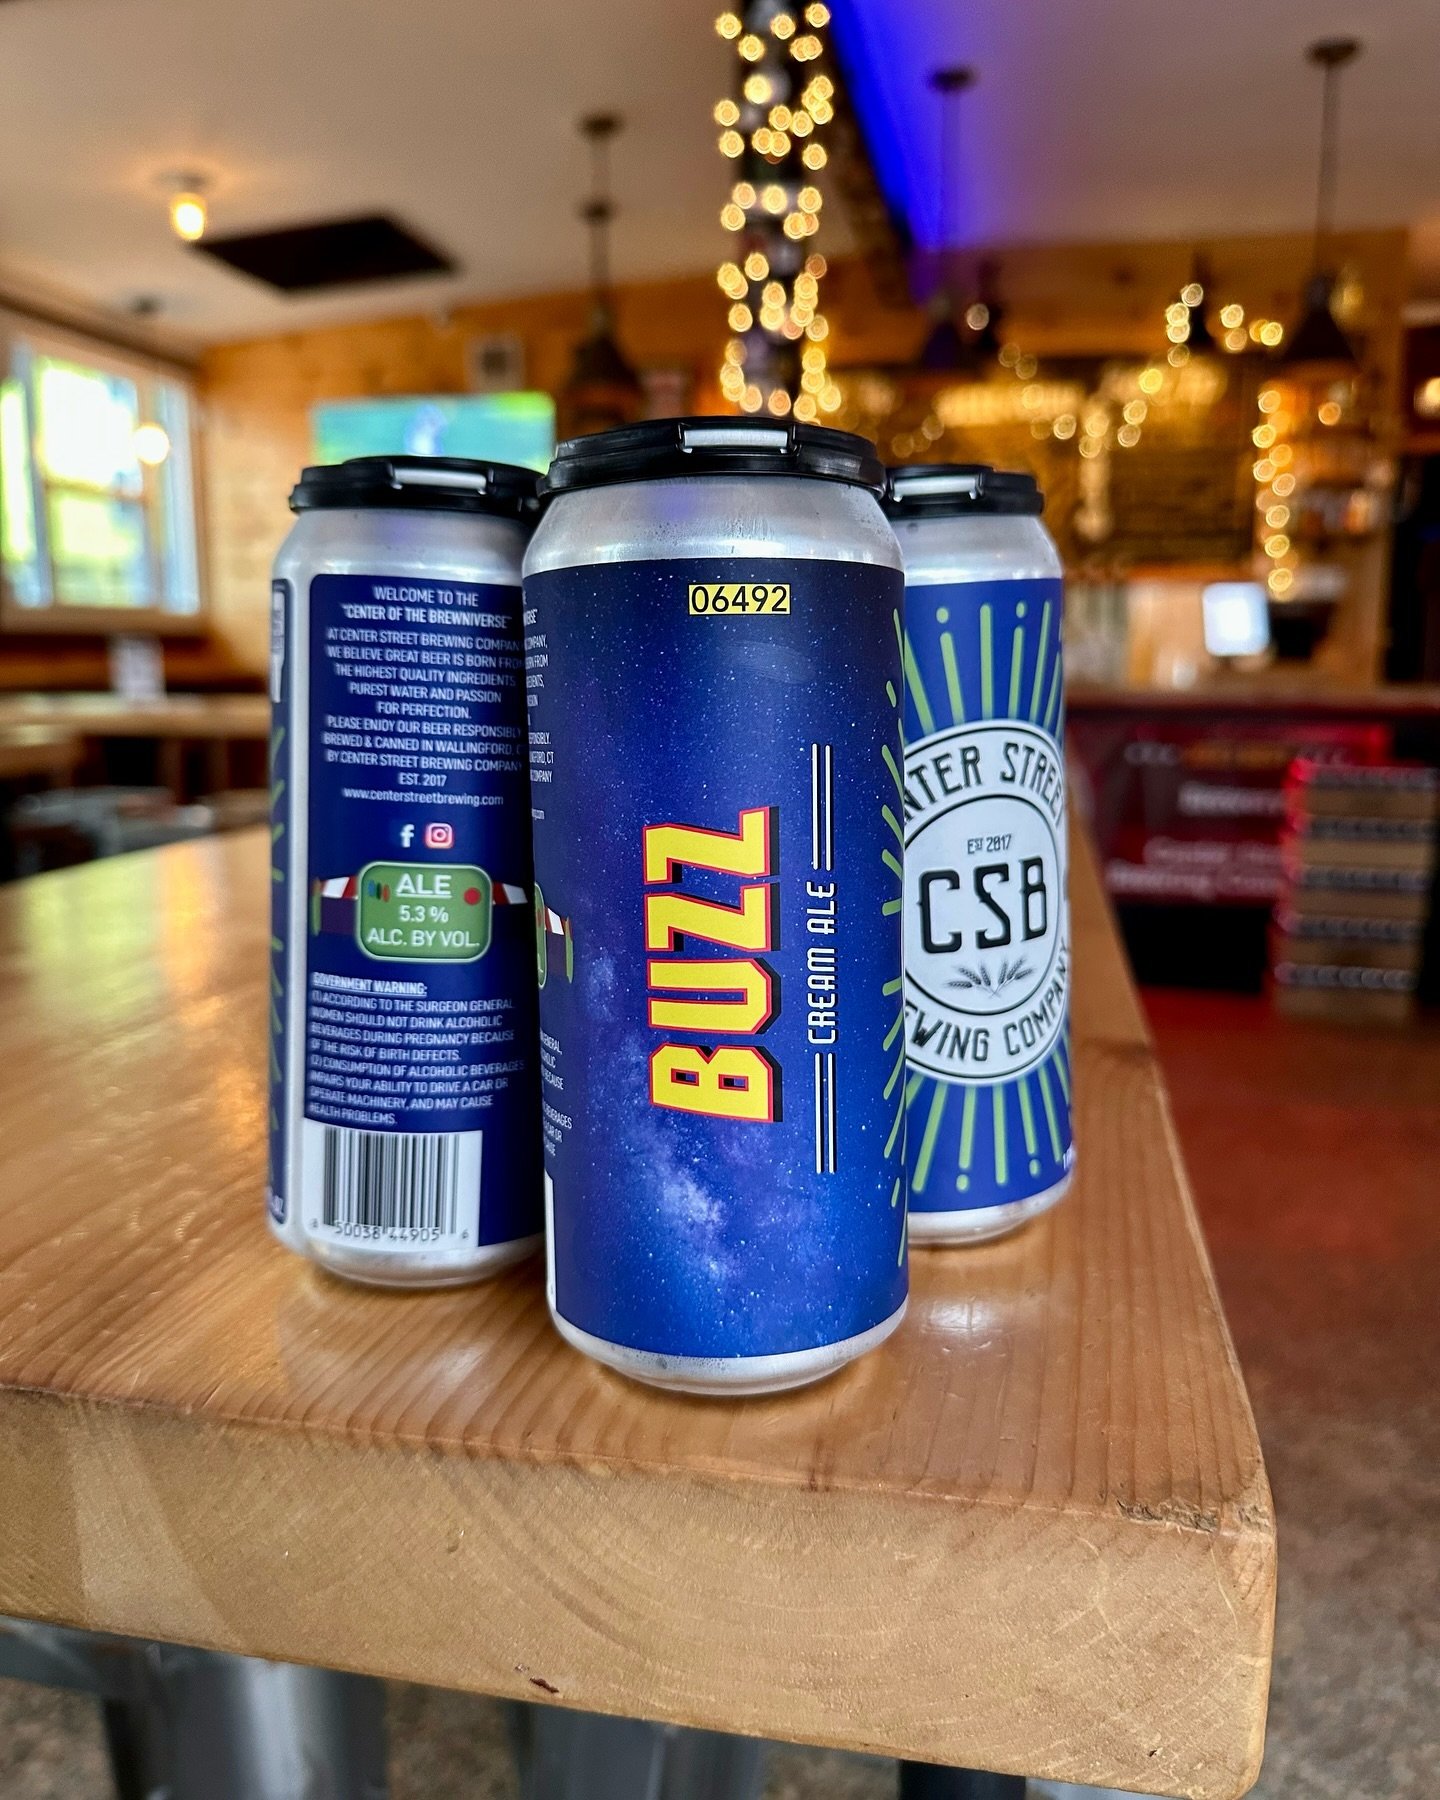 Buzz Cream Ale is now available in cans! Slightly sweet, balanced and crisp&hellip; if you&rsquo;re looking for a craft light beer, look no further! &ldquo;To Center Street and beyond!&rdquo;

#beer #brewery #ctbrewersguild